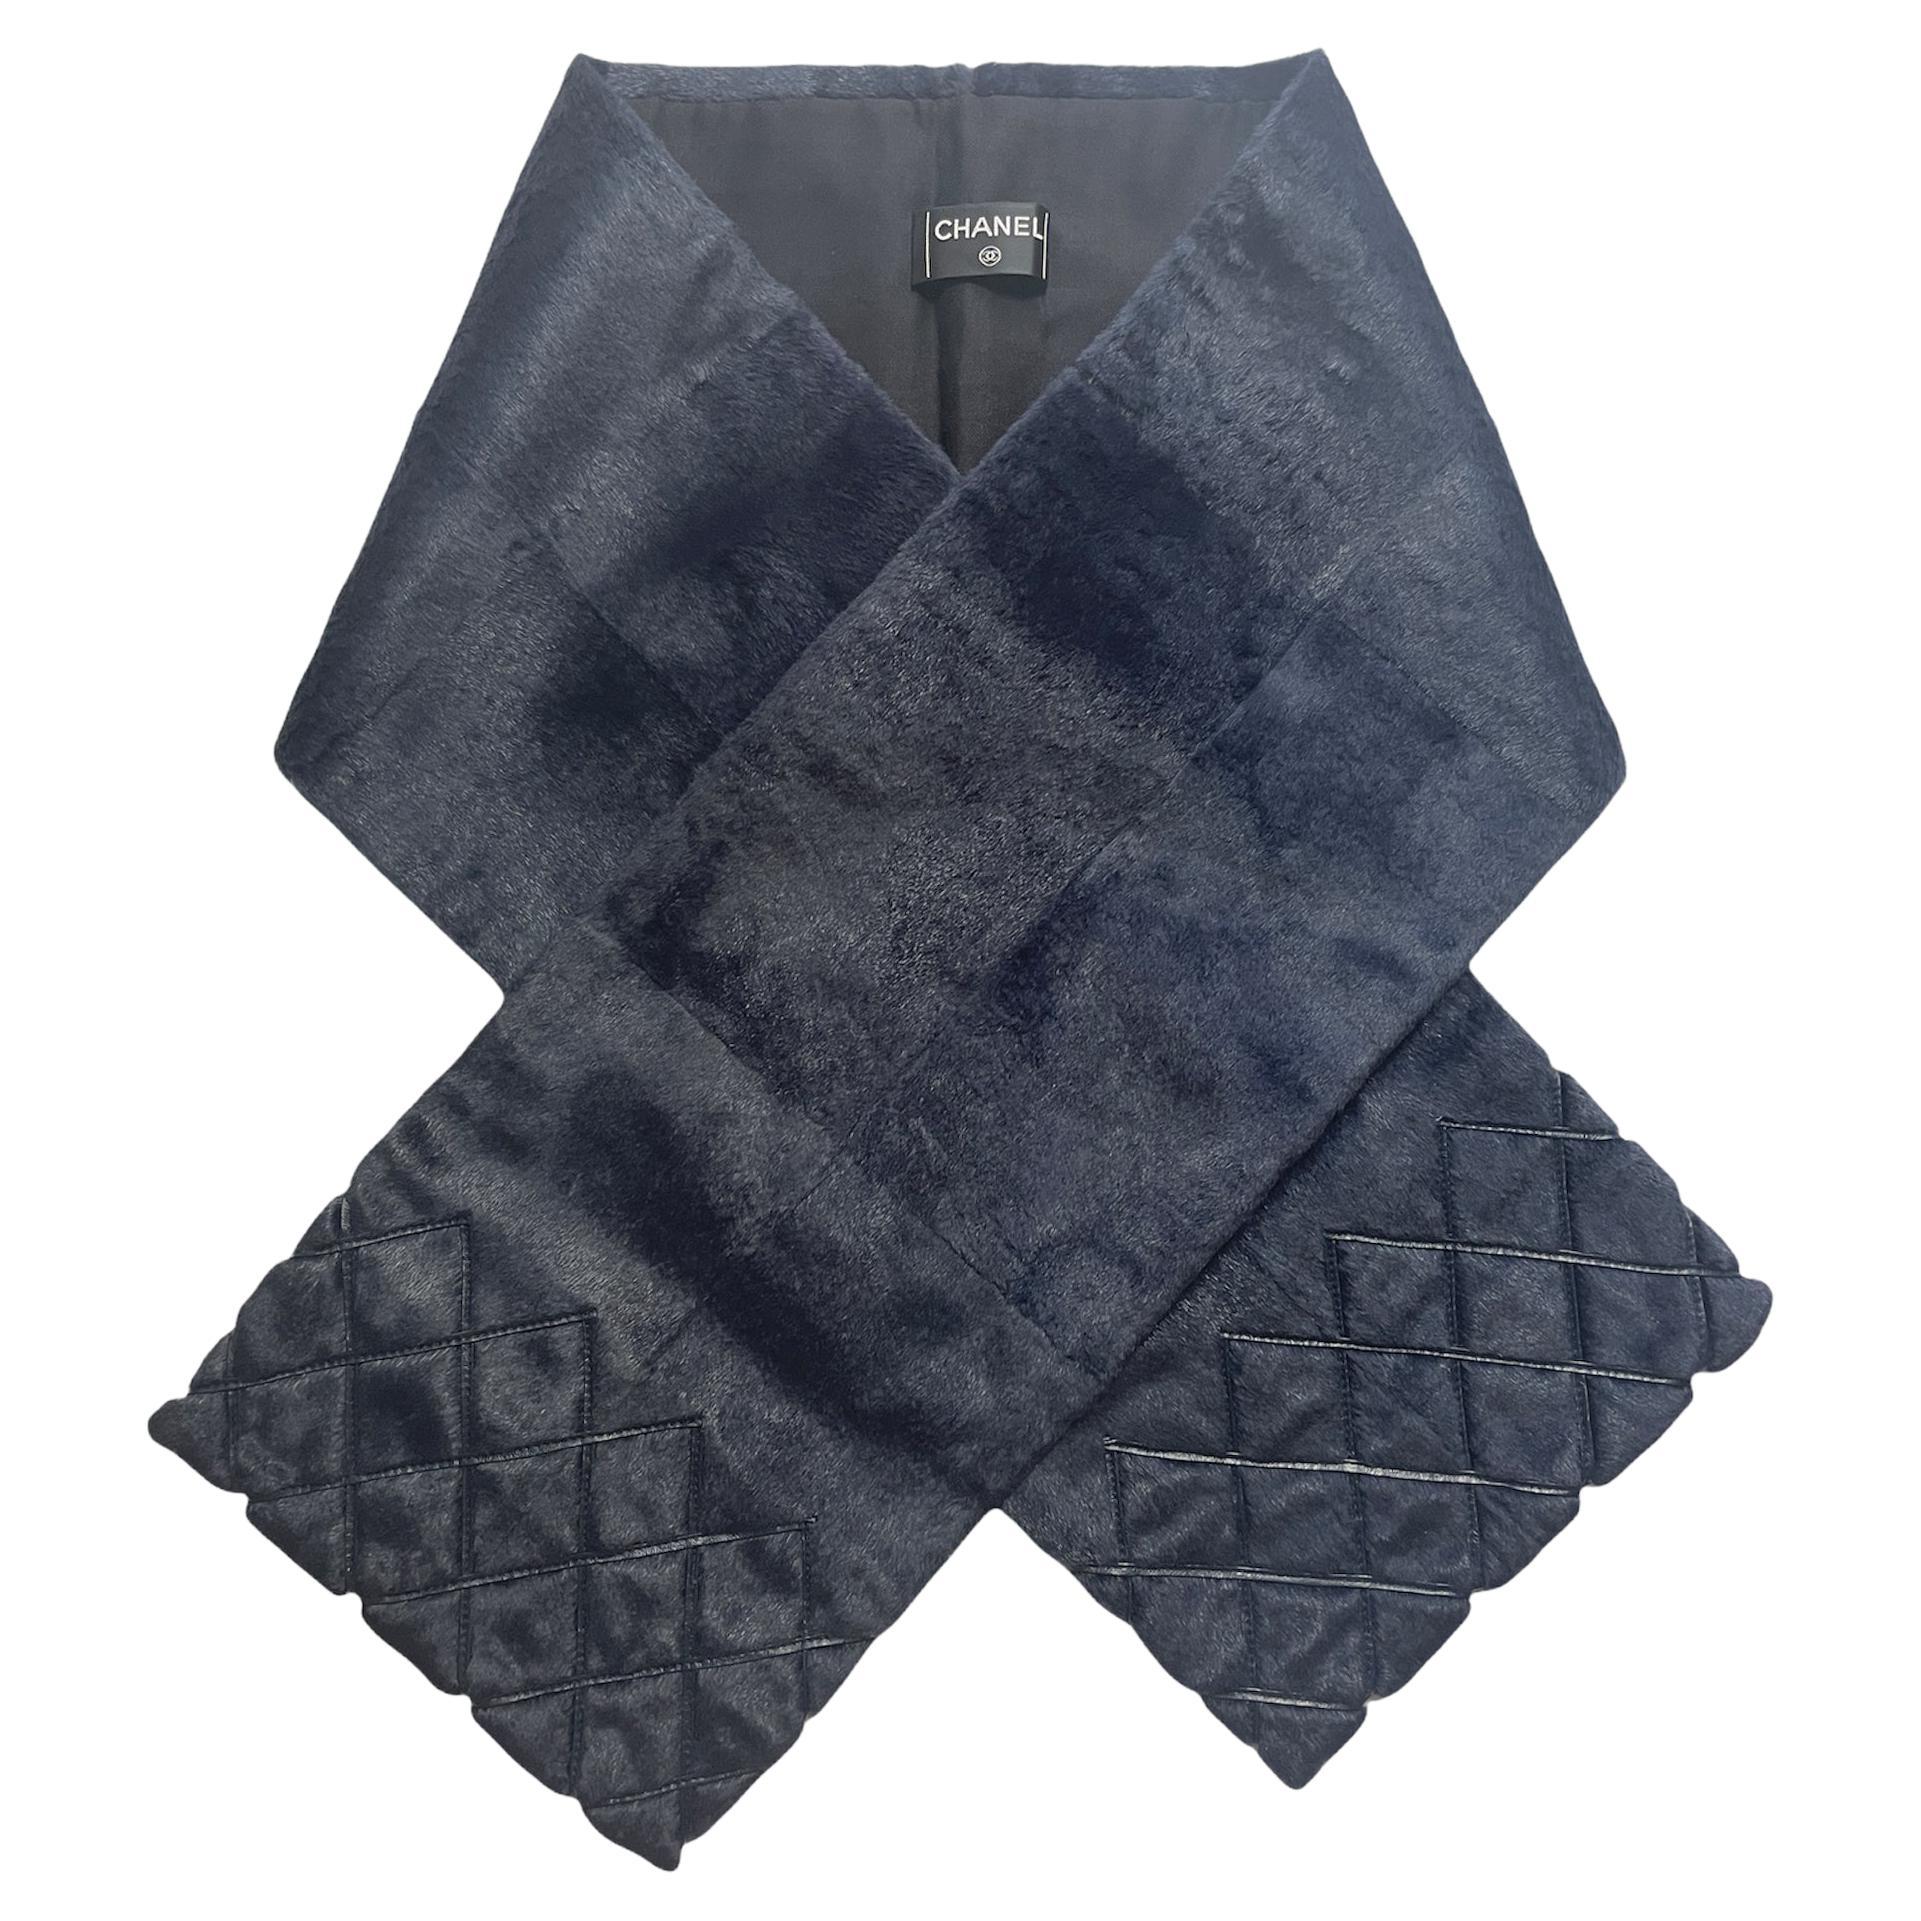 Chanel Navy Rabbit Fur Stole w/ Leather Quilted Stitching at Trim For Sale